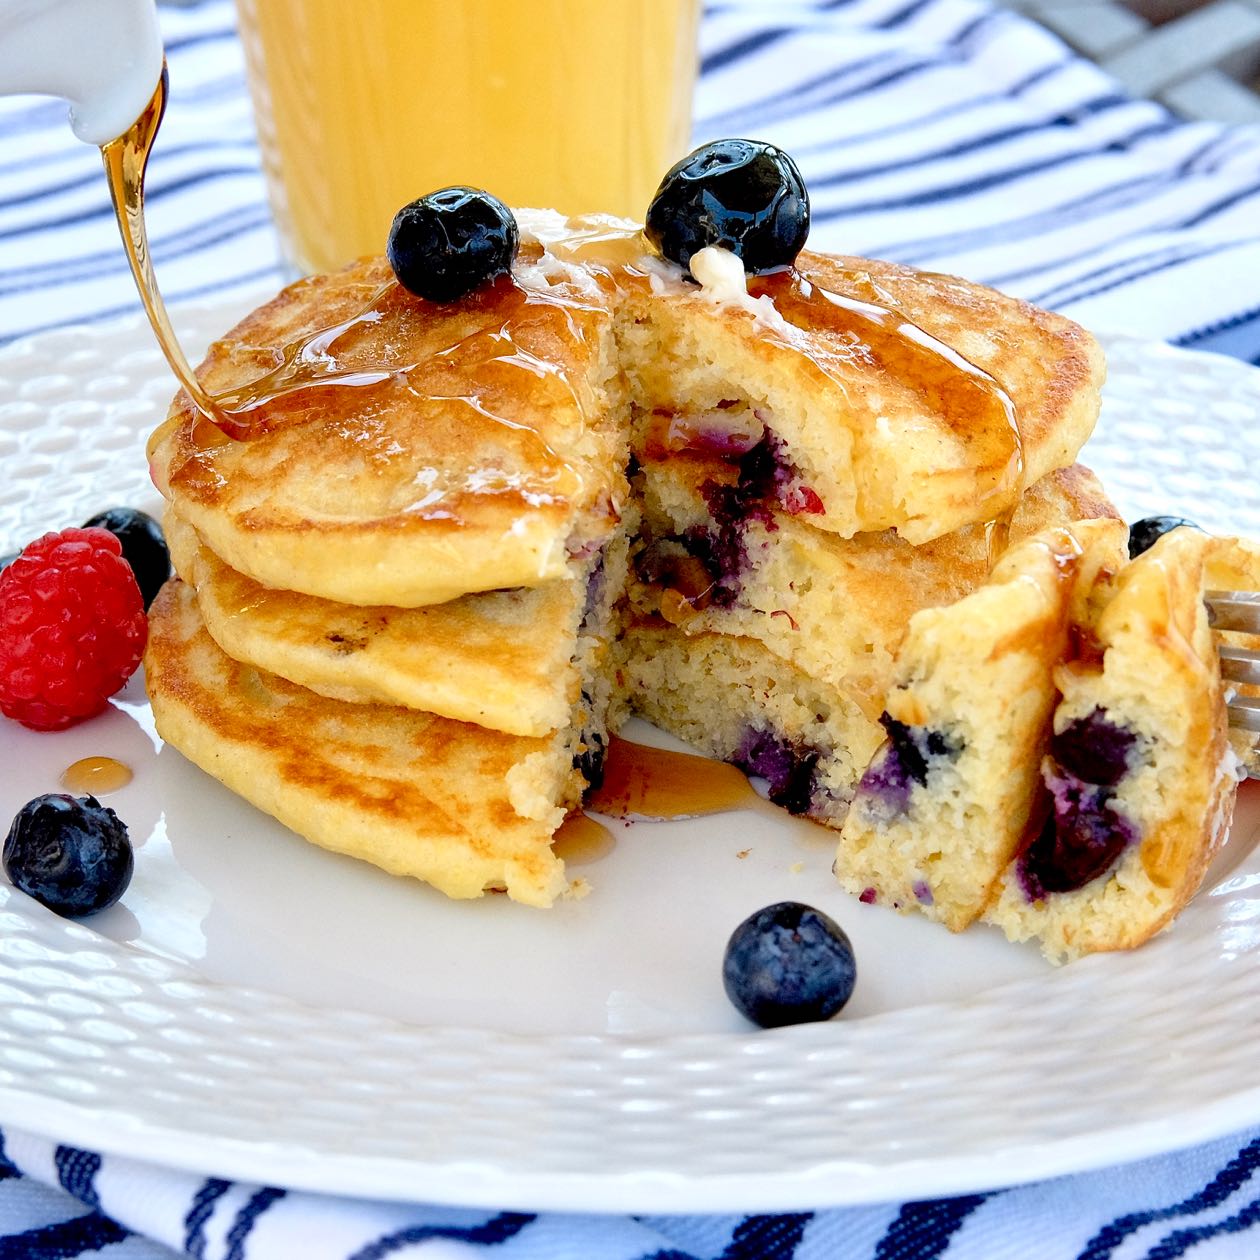 Blueberry Corn Cakes on white plate with syrup being poured over them. Glass of orange juice in background